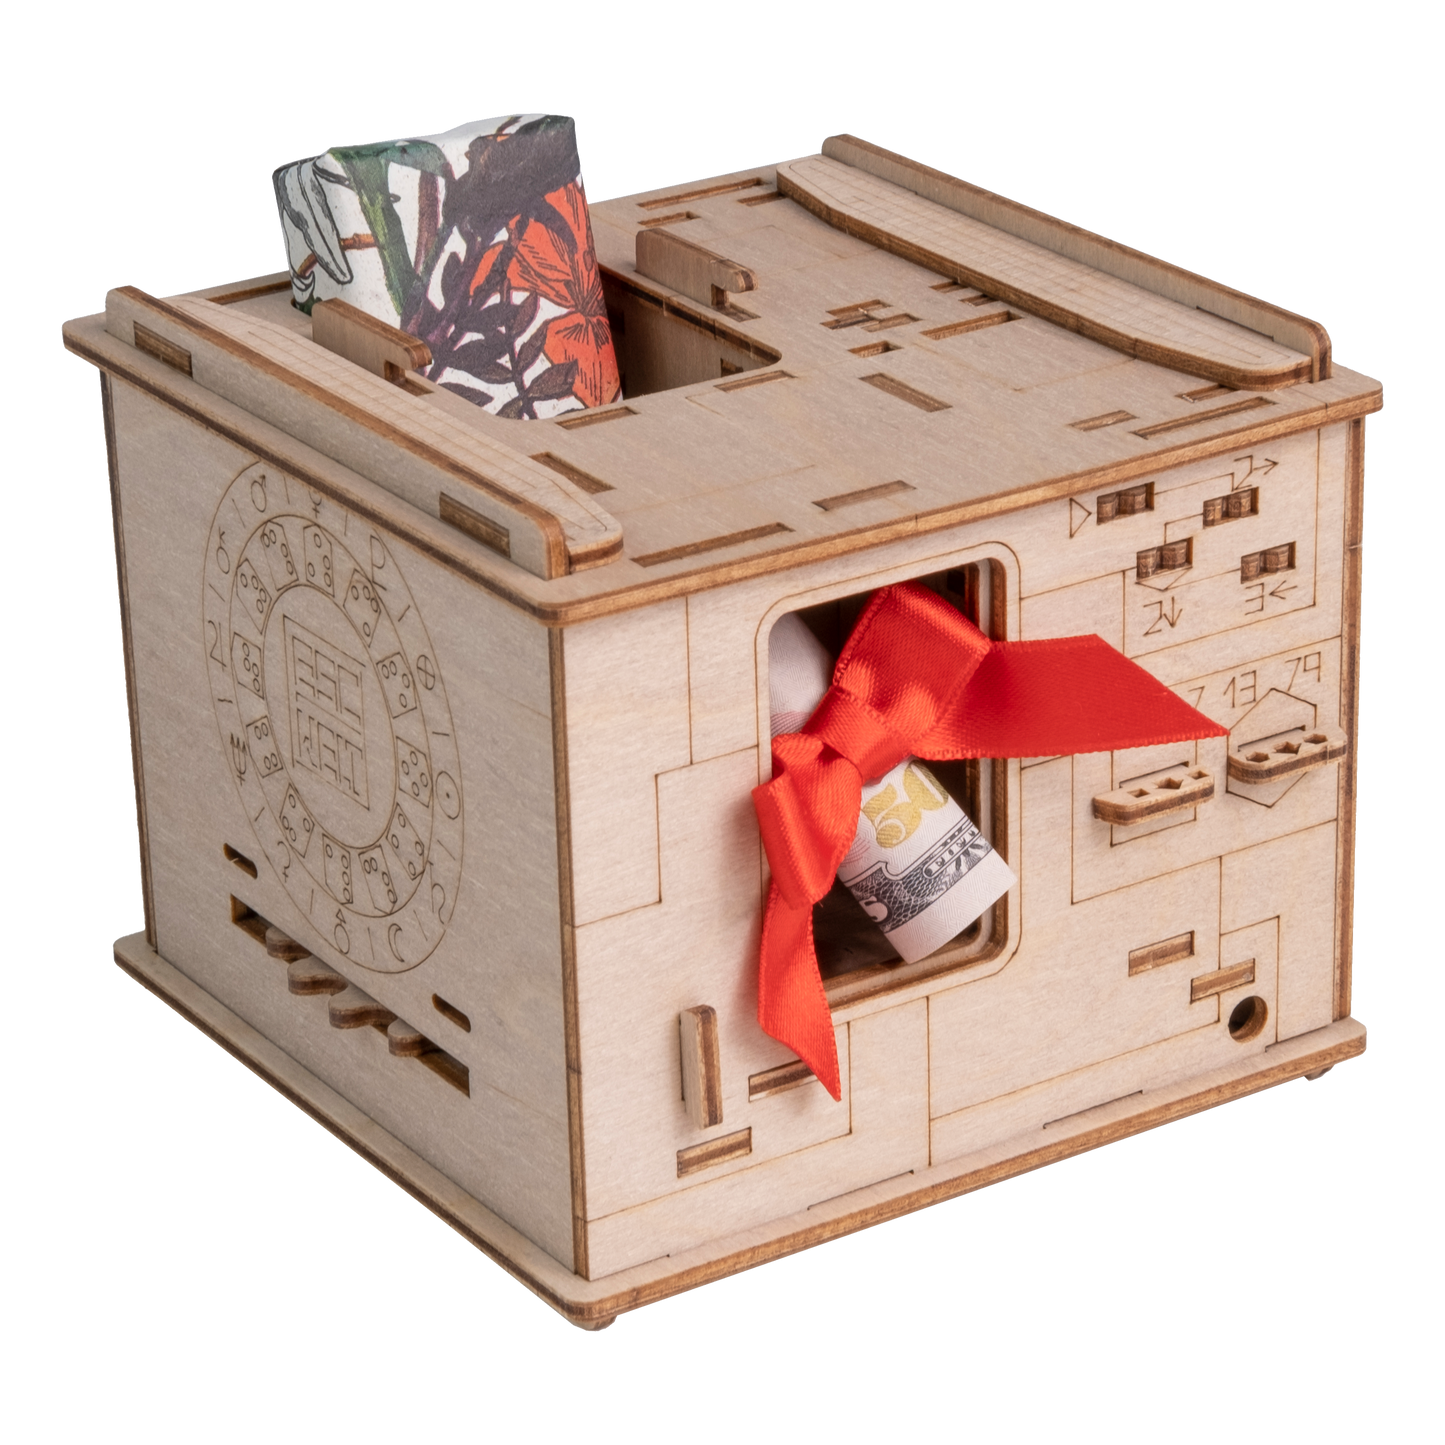 Space Box 3D Constructor